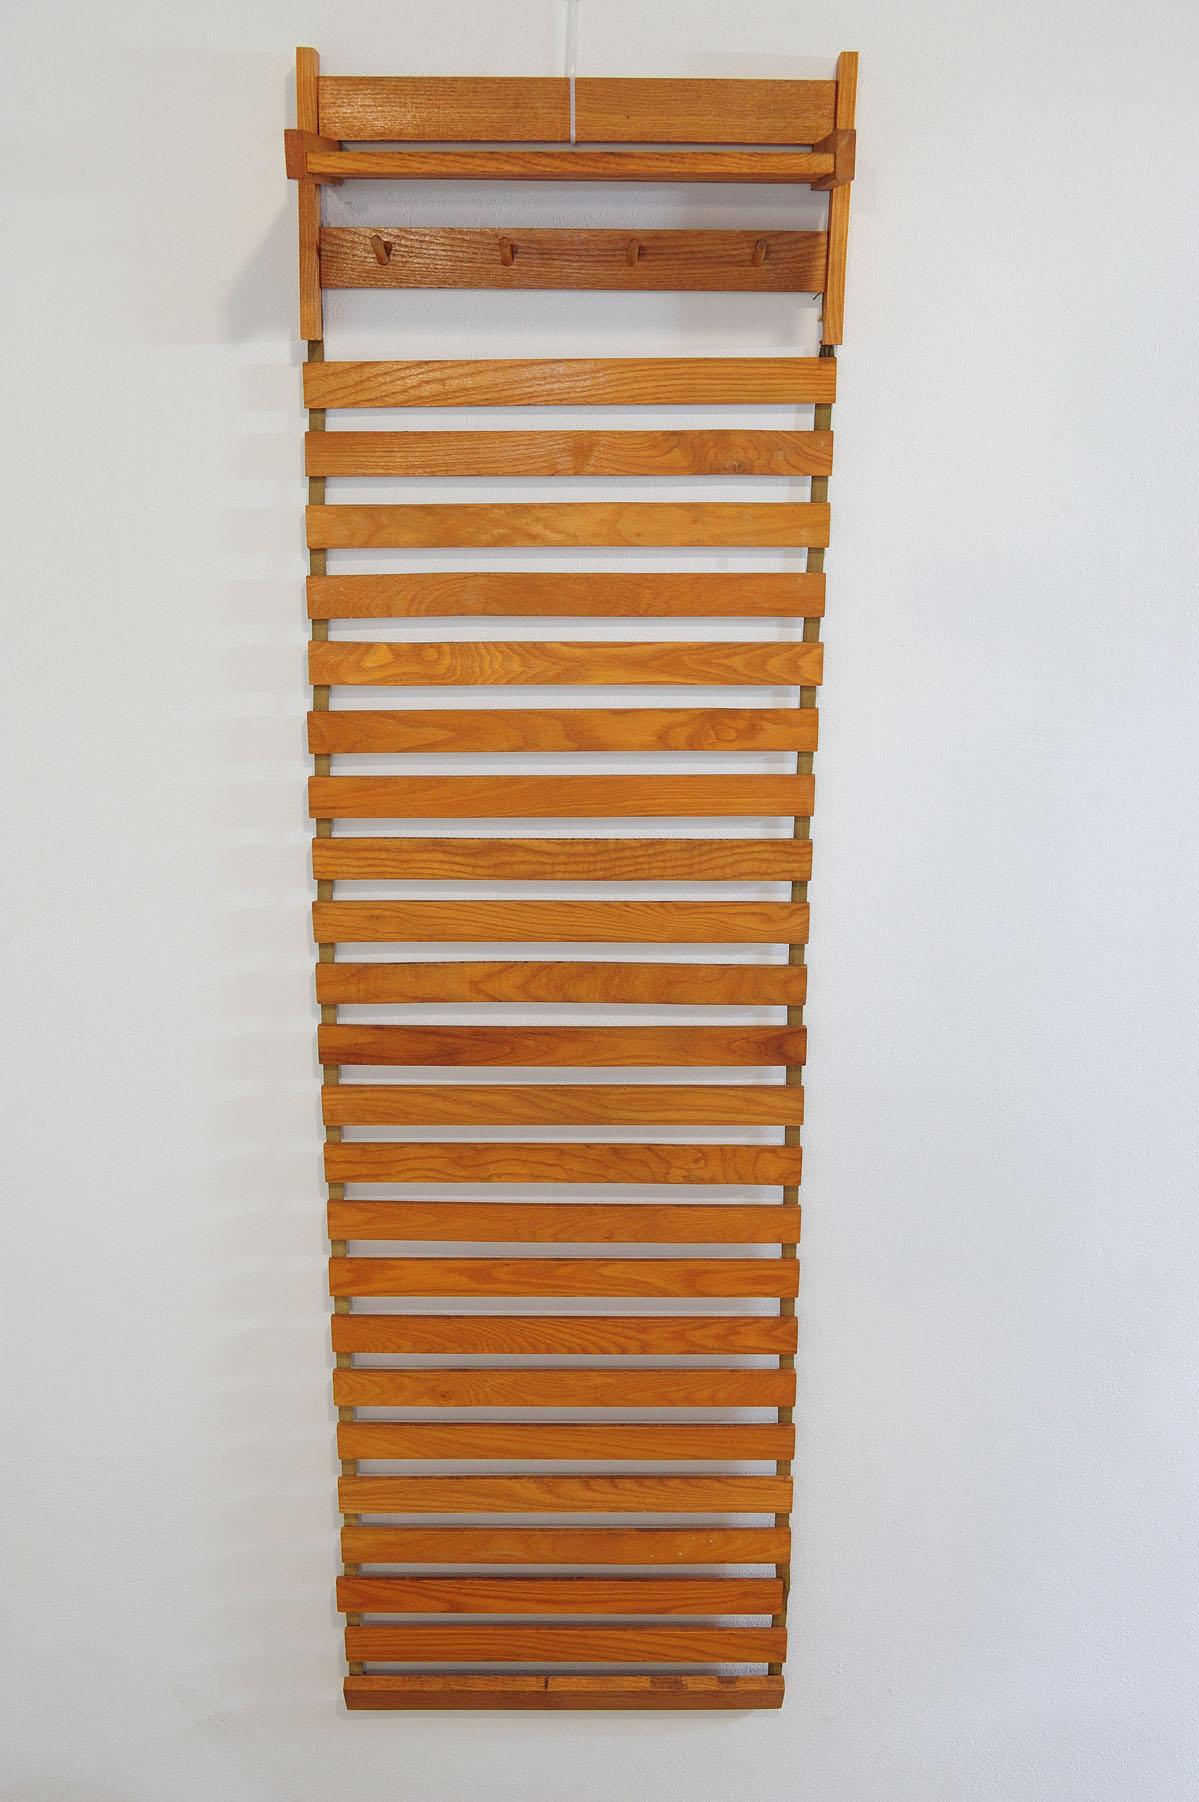 Czechoslovak mid-century folding wall hanger was made by ULUV company in the former Czechoslovakia in the 1960s.  It´s made of beech wood. It´s in good original condition, showing signs of age and using.
Folding slats follow the upper hanger and